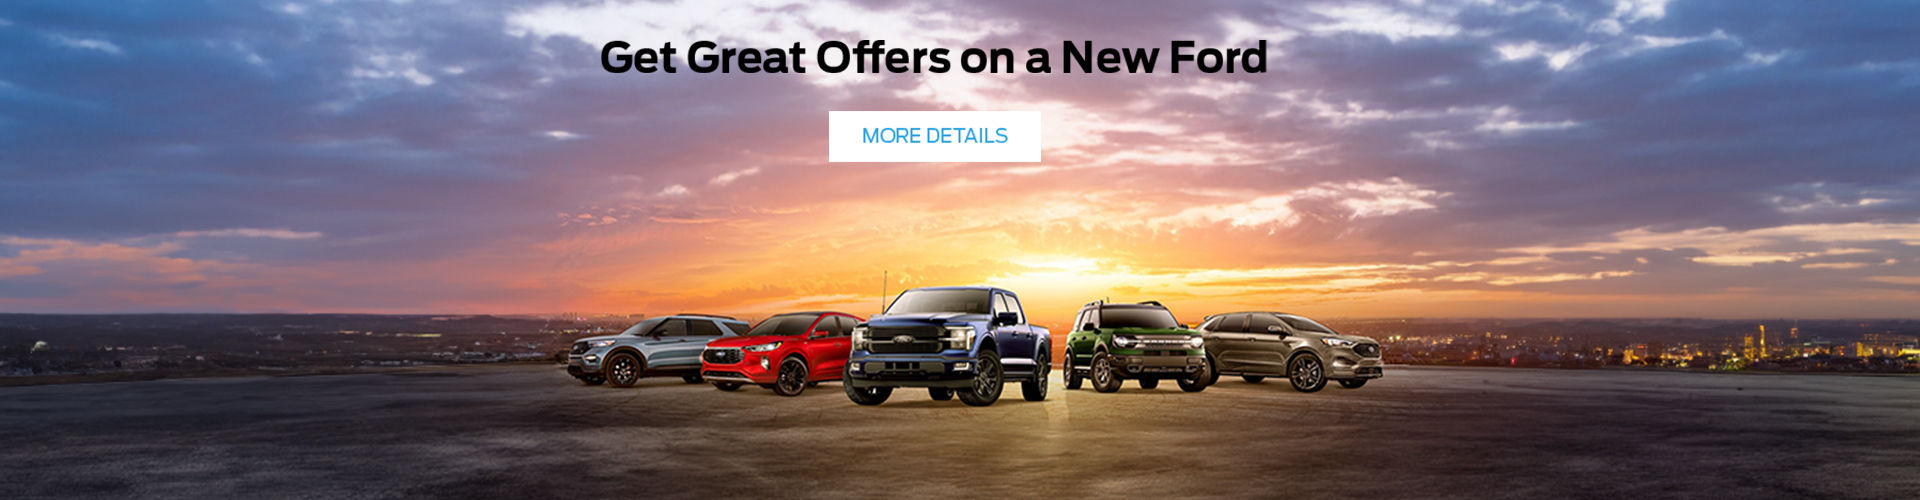 Ford Special Offers Event